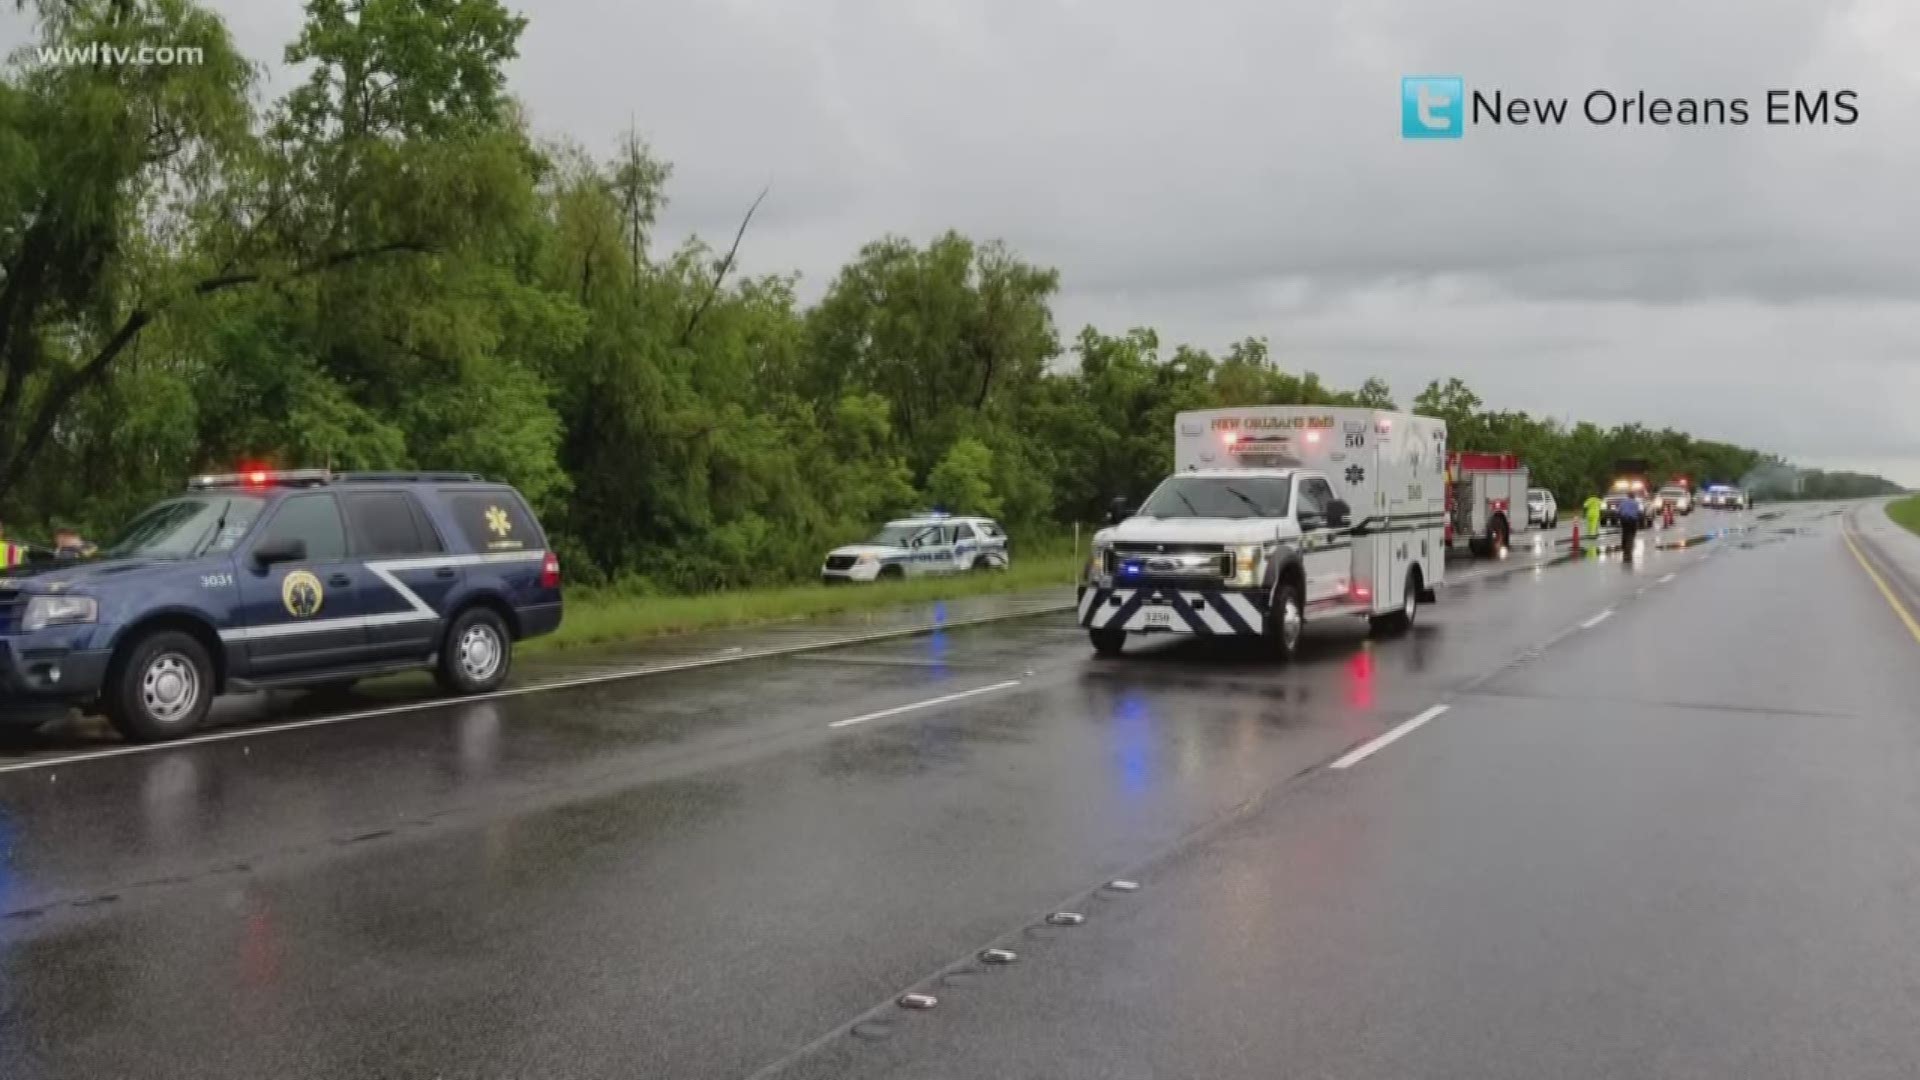 Authorities are investigating two separate crashes on the eastbound lanes of Interstate 10 that left one officer hurt and the roadway closed Monday morning.